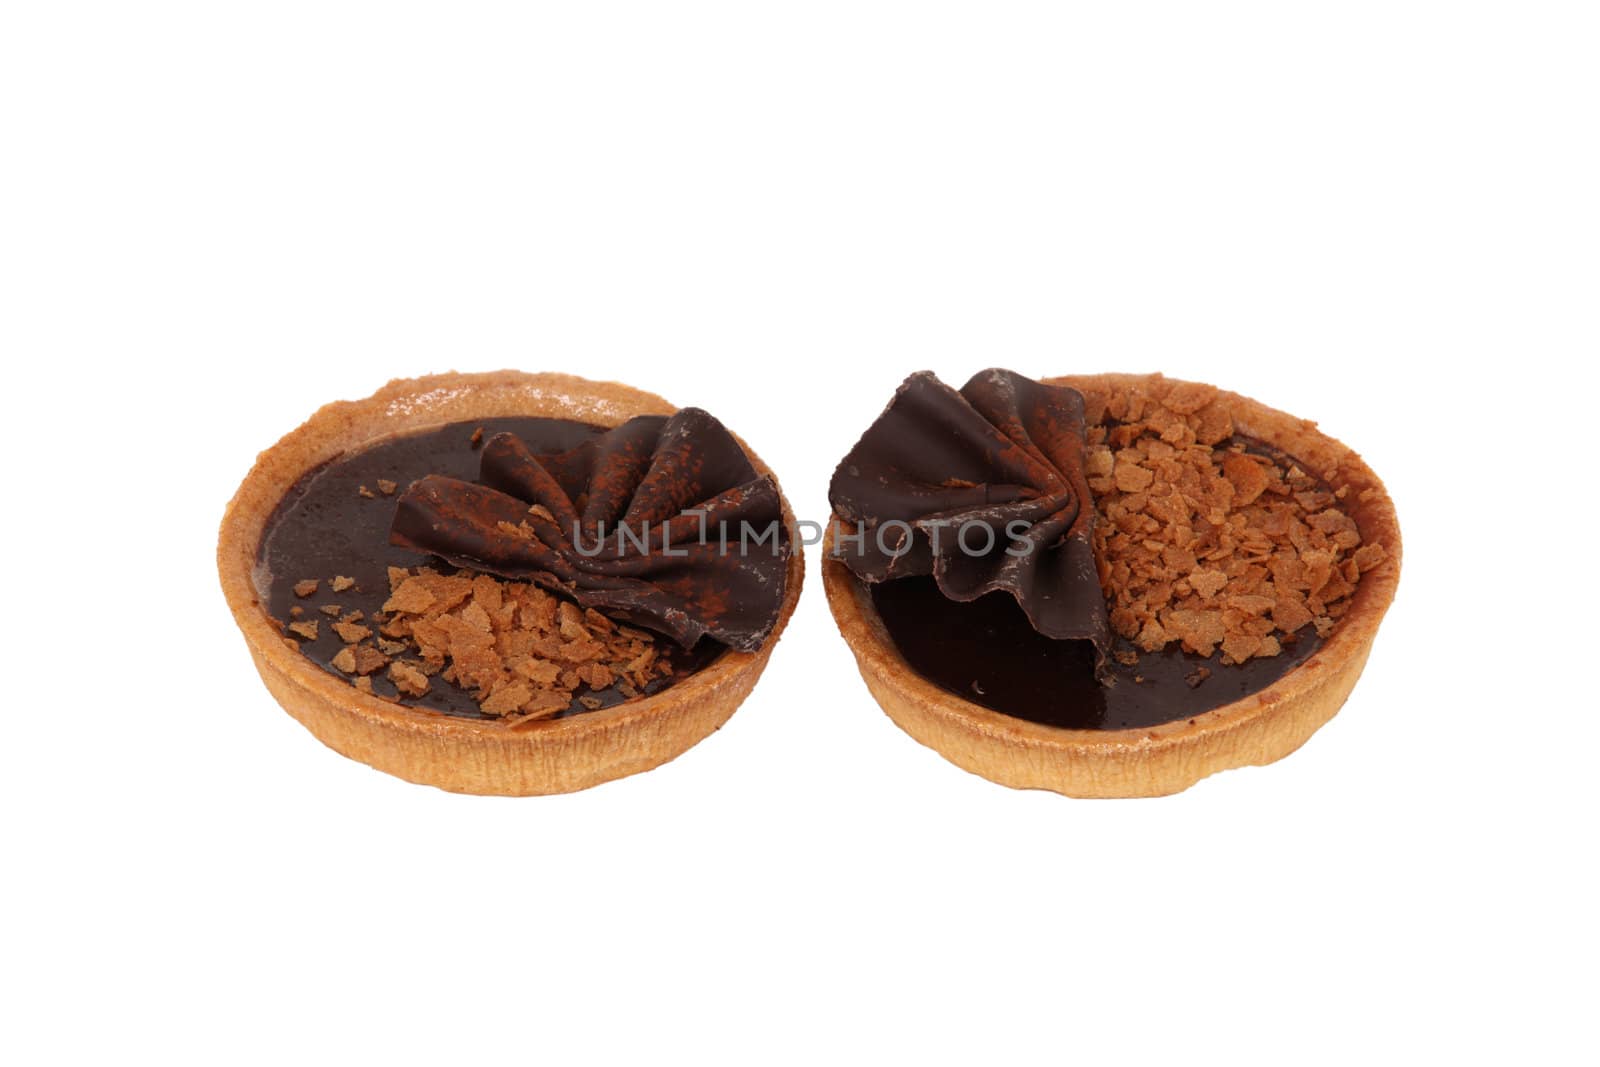 duo of delicious chocolate tartlets by phovoir